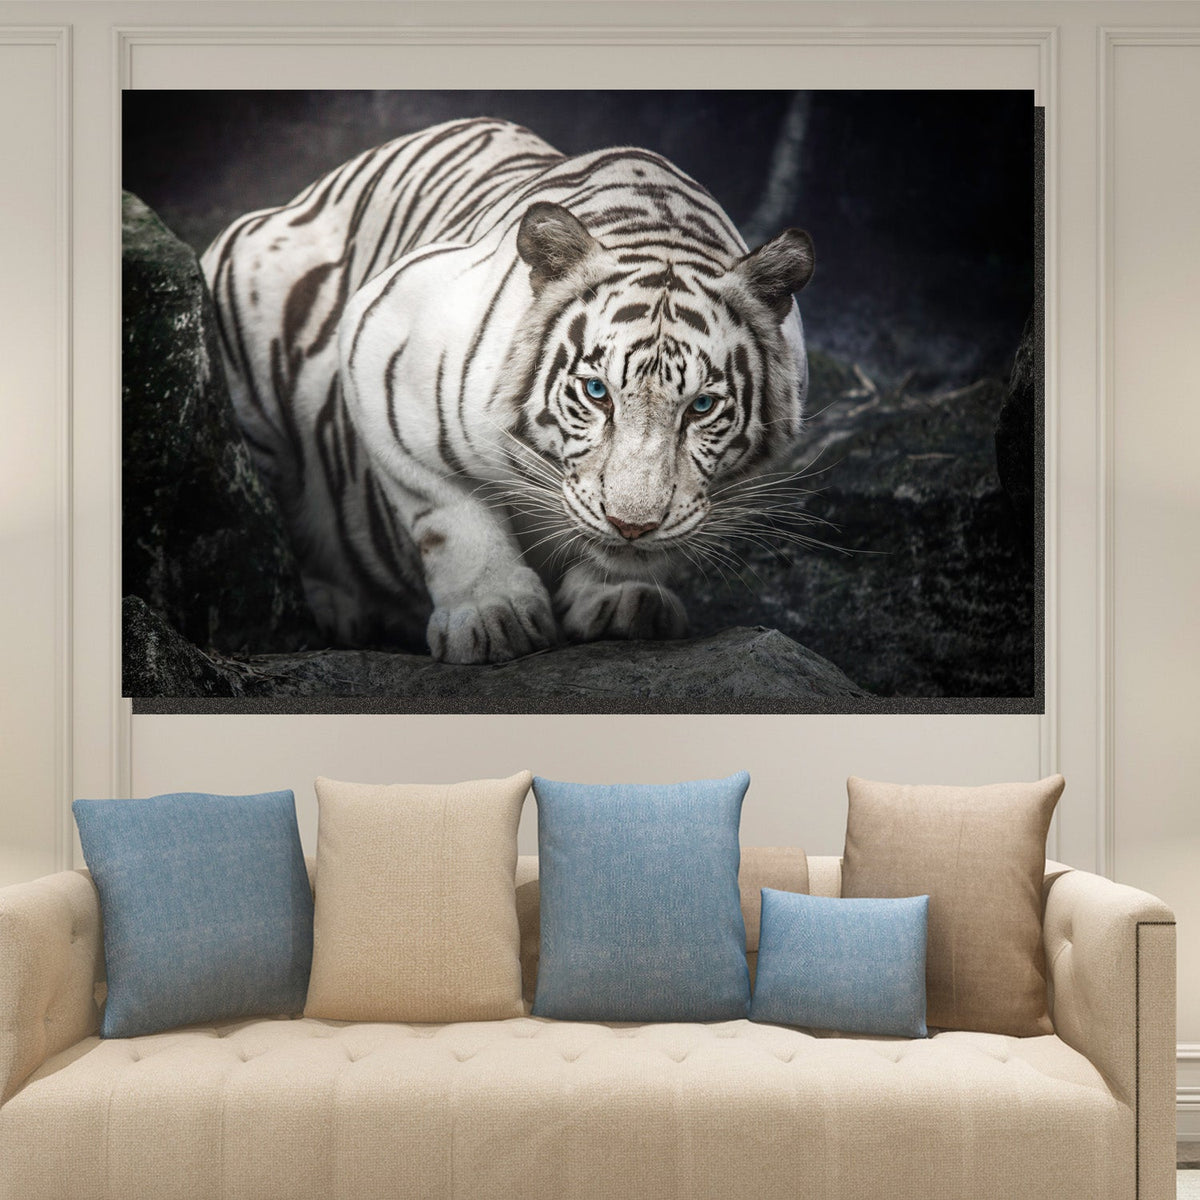 https://cdn.shopify.com/s/files/1/0387/9986/8044/products/CrouchingTigerCanvasArtprintStretched-1.jpg